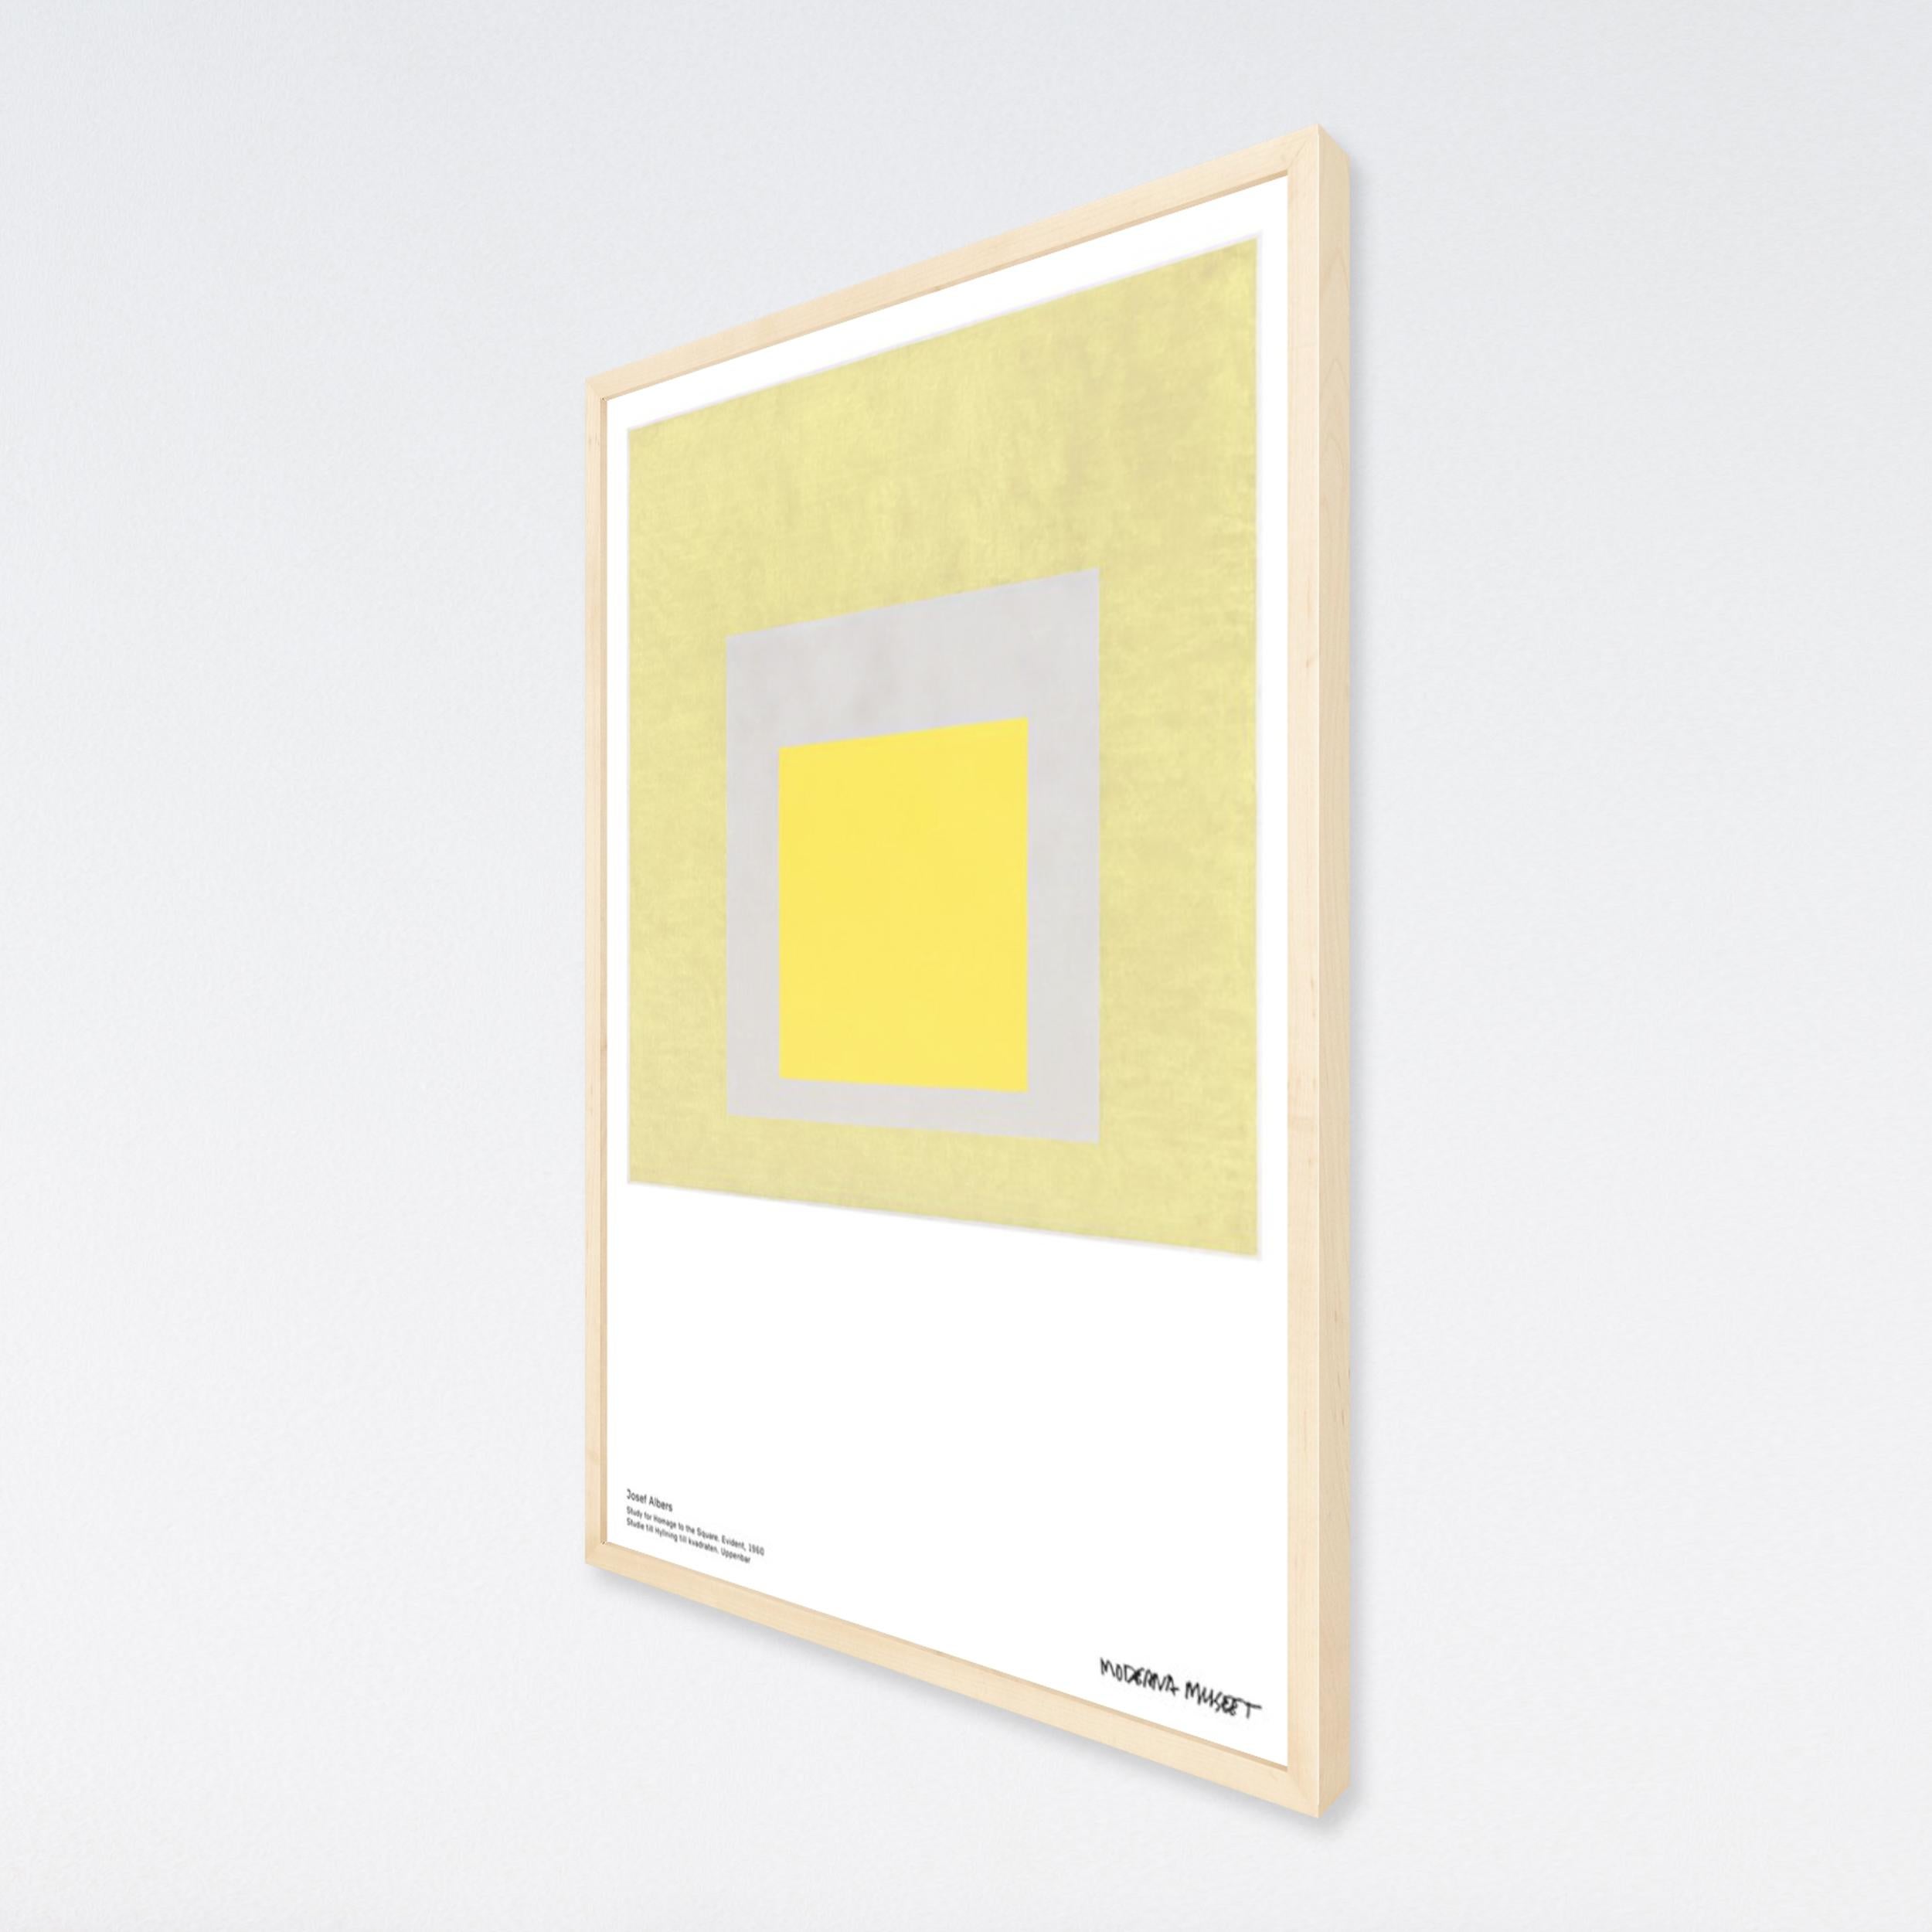 Josef Albers, Museum Poster Study for Homage to the Square, Yellow Gray Minimal 2